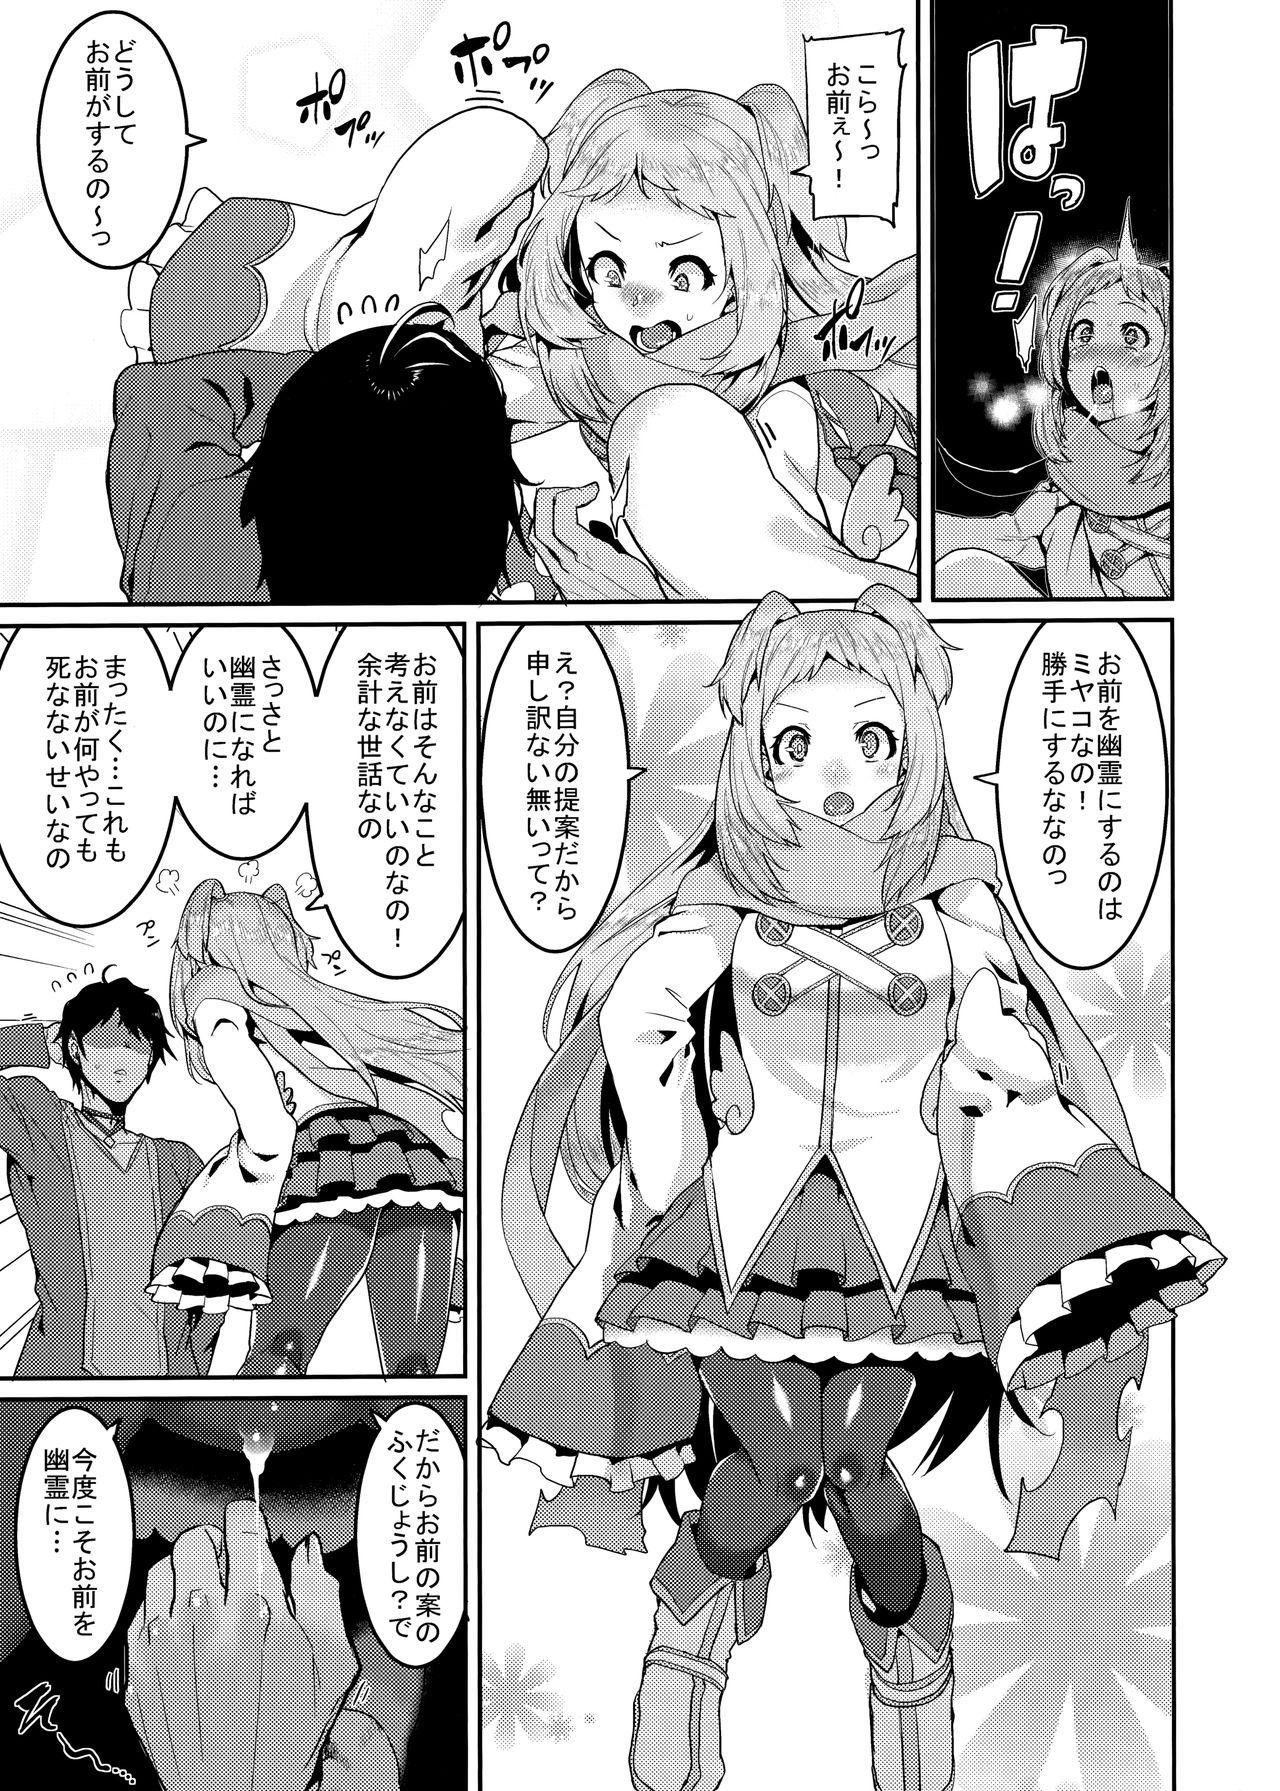  Pudding Switch - Princess connect Bottom - Page 7